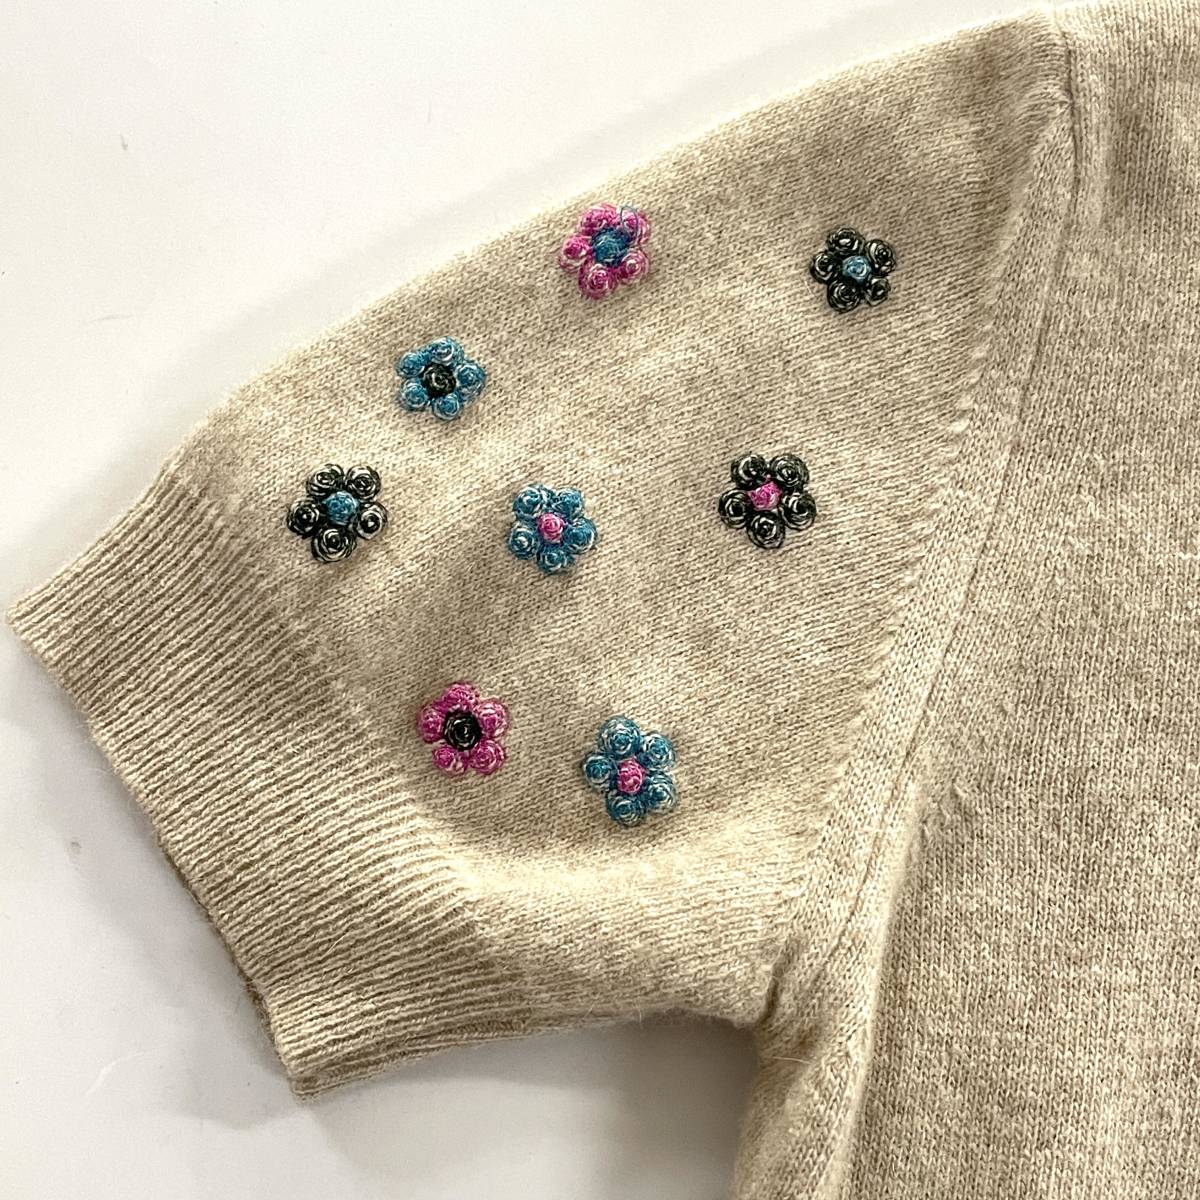 *VERSUSveru suspension Versace Italy made VINTAGE small flower embroidery Anne gola cashmere . knitted sweater 38[ letter pack post service light mailing possible ]F